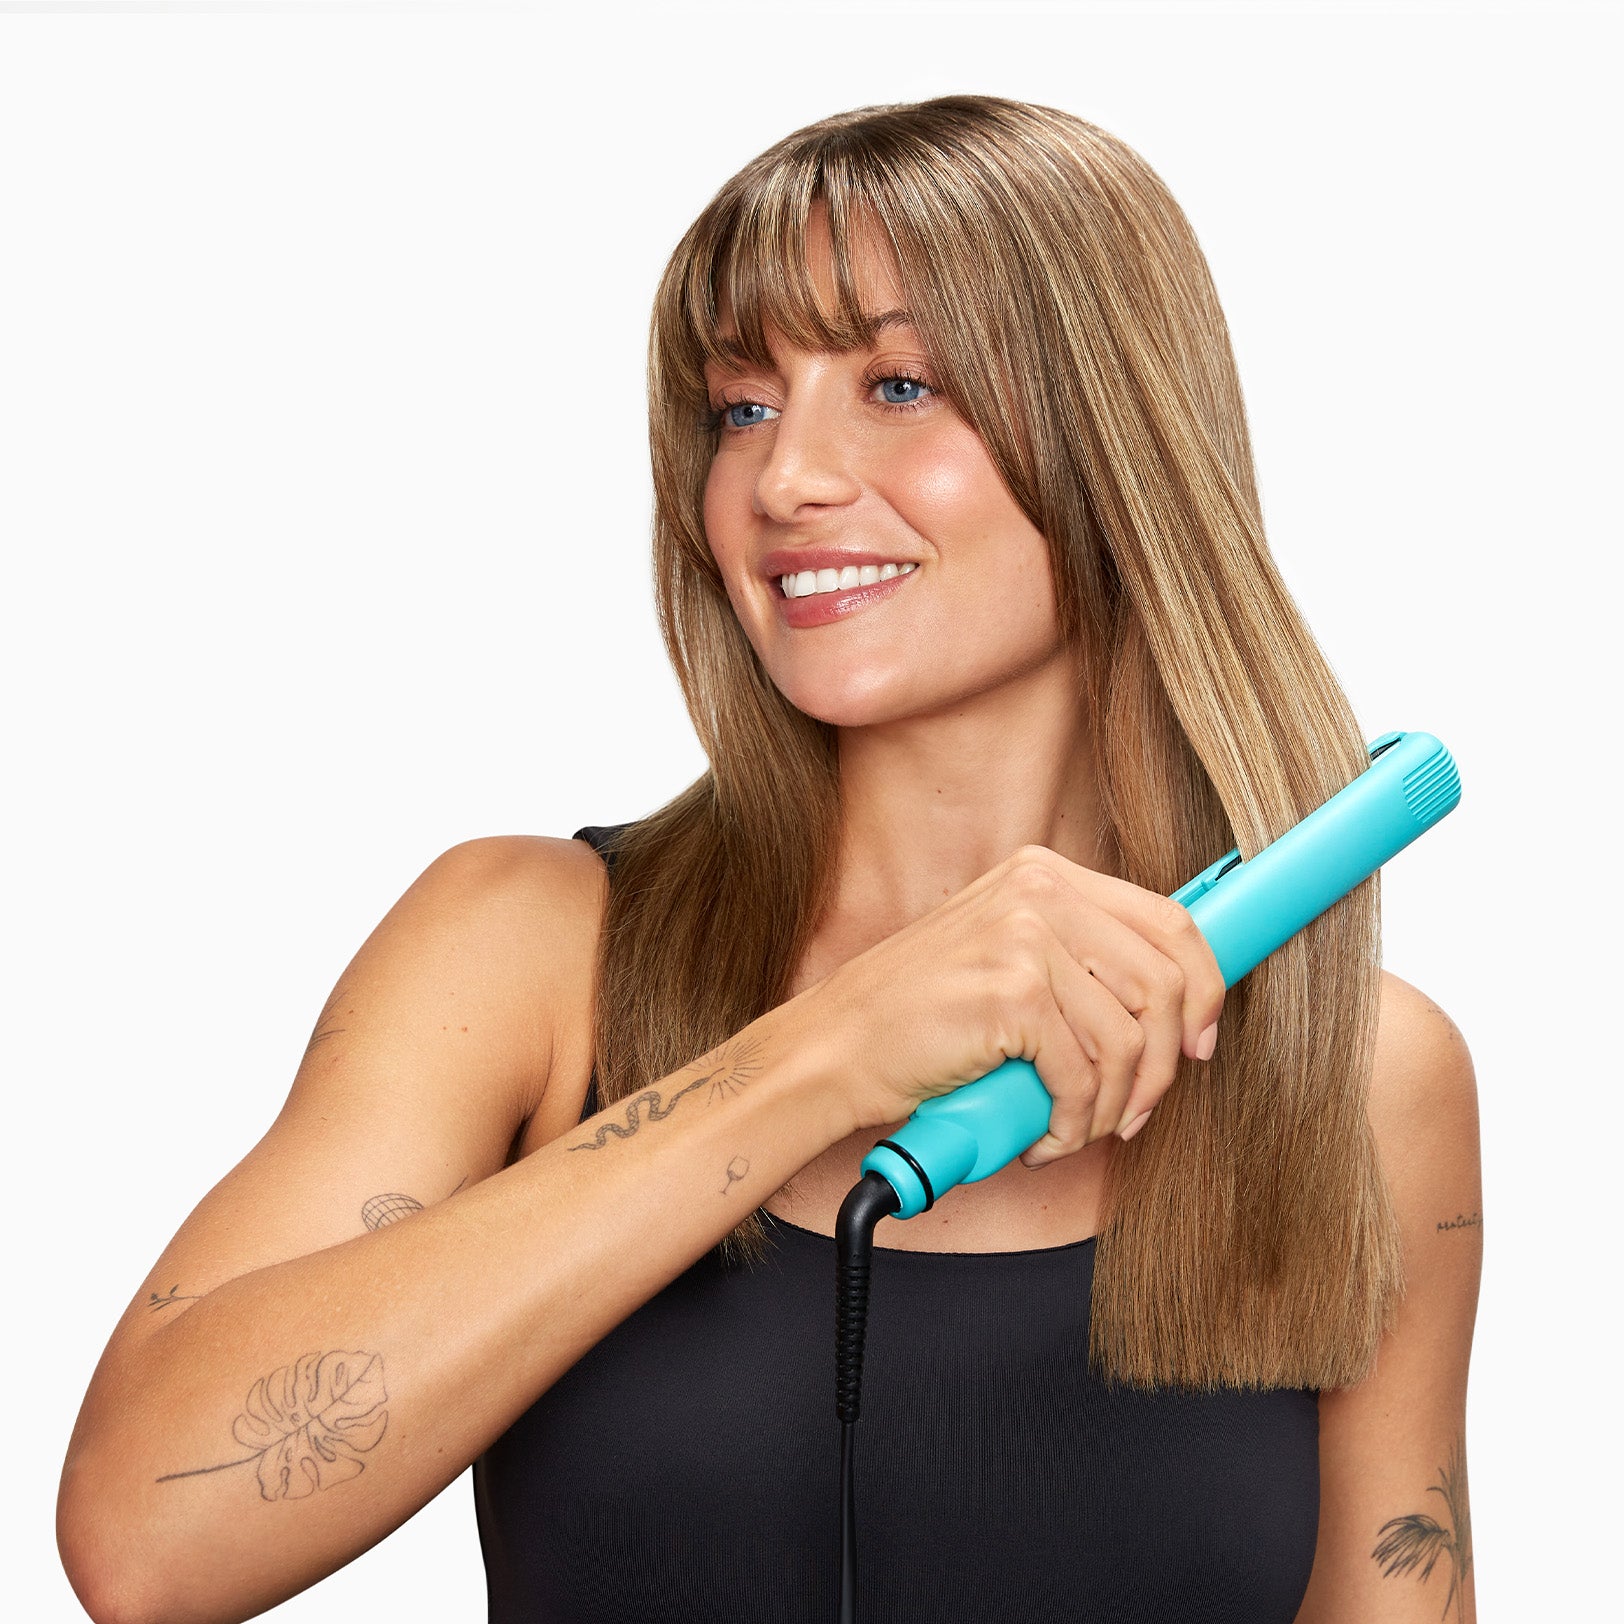 Model with tattoos straightening her light brown hair with the Soda Fountain Blue Retro Iron.